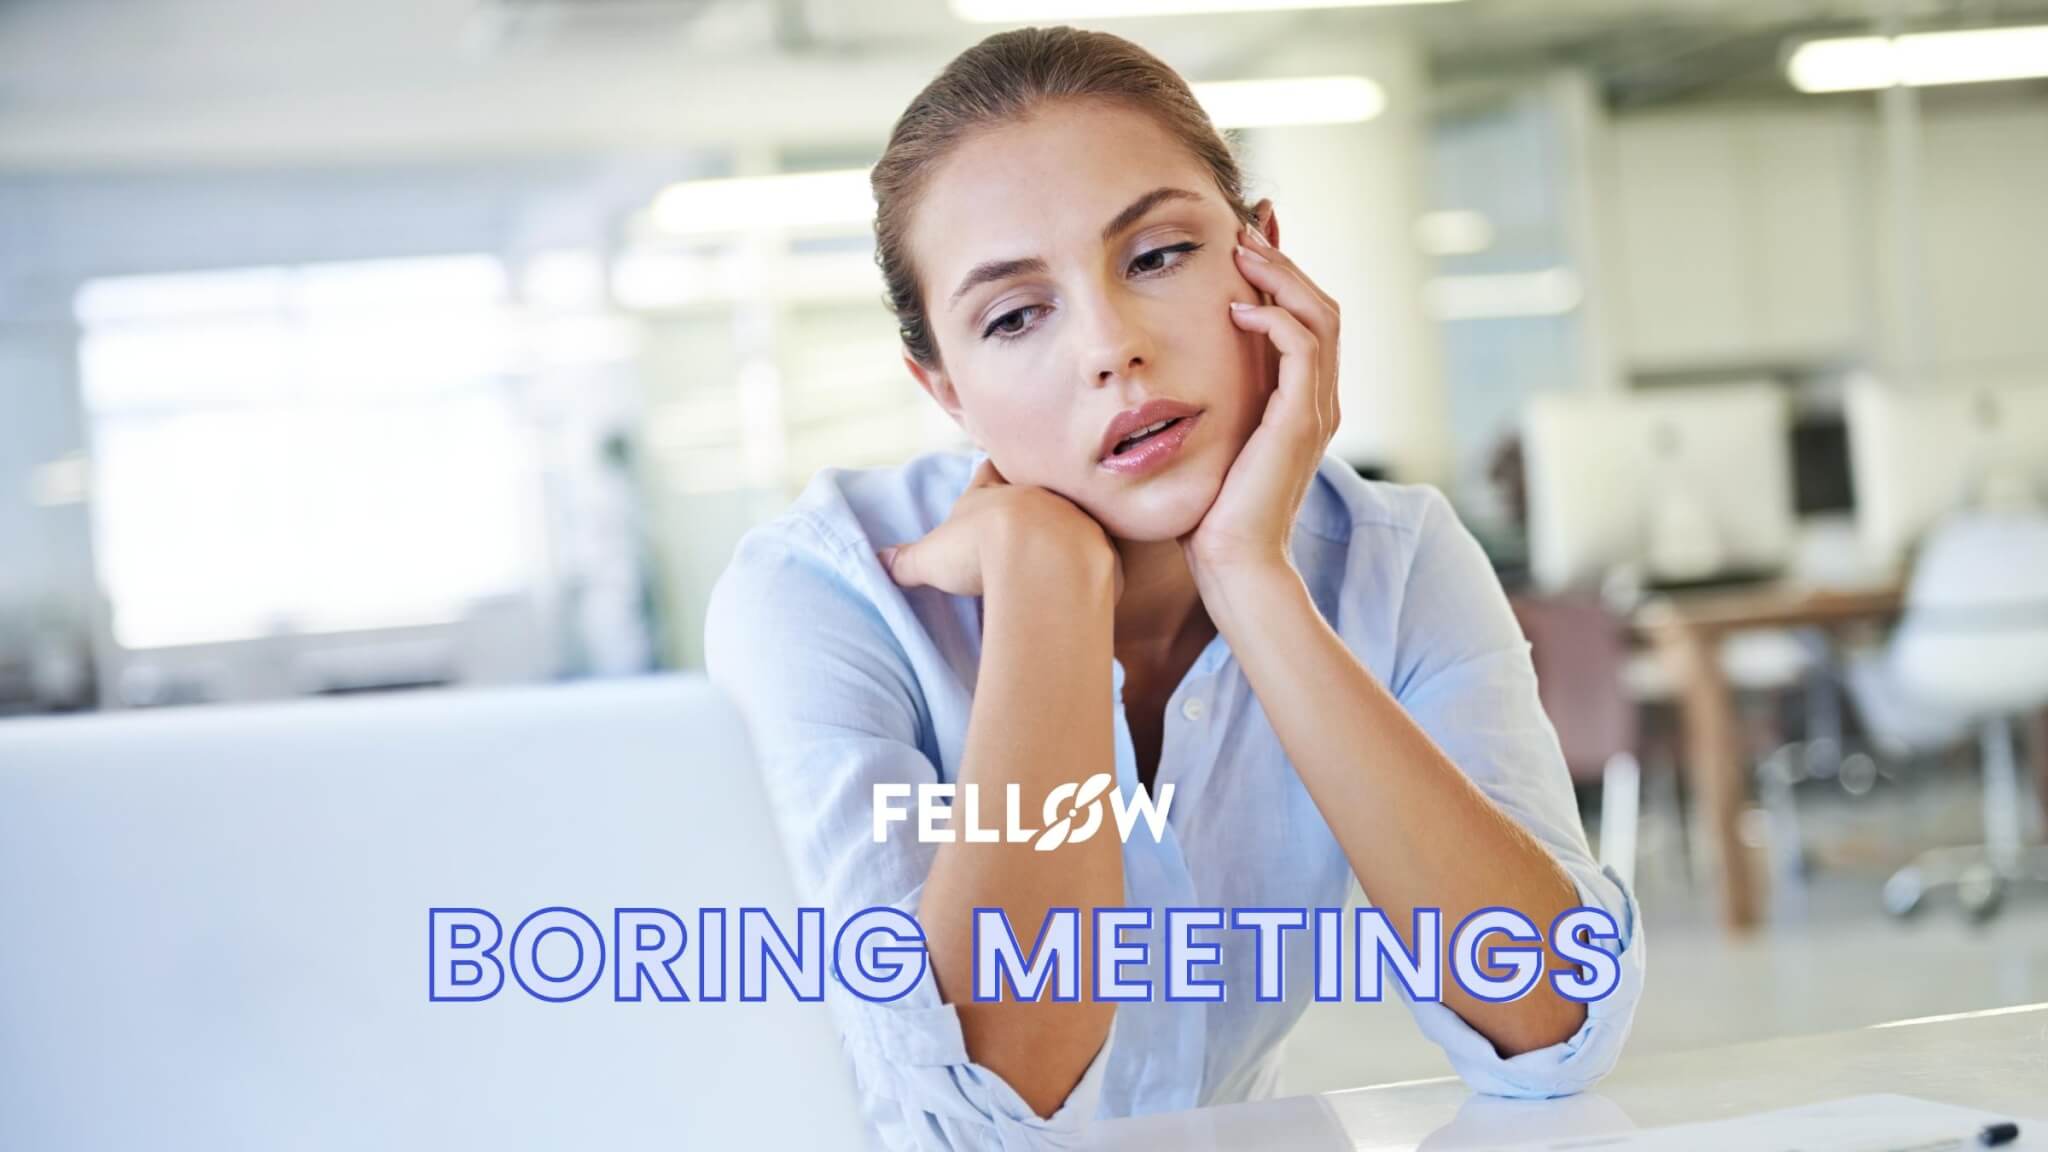 Do you think that a boring boardroom meeting can also have an